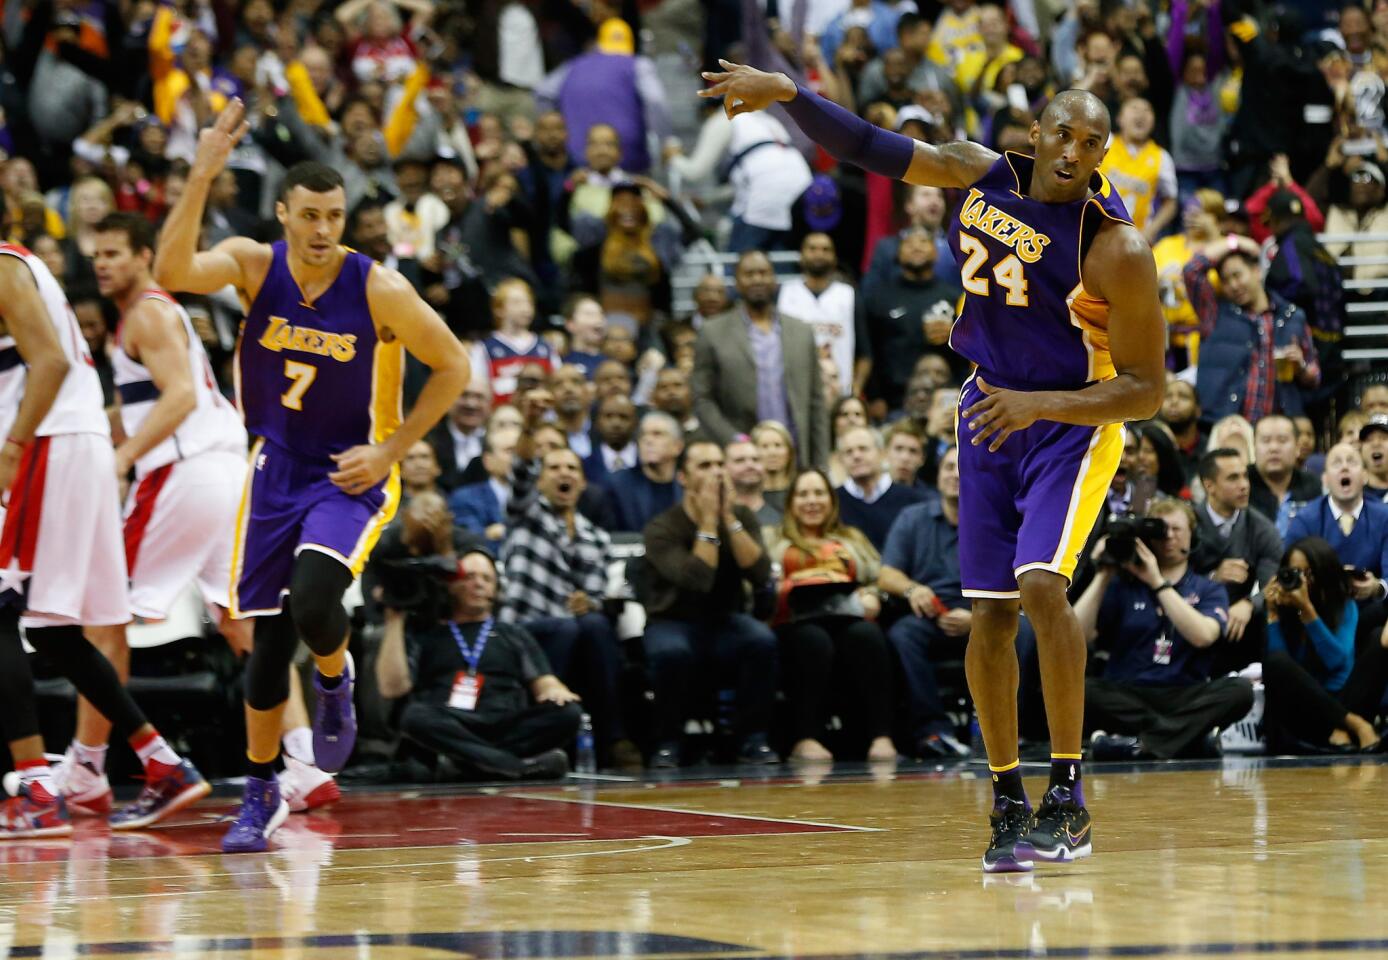 Kobe Bryant has 31 points in the Lakers' win over Wizards